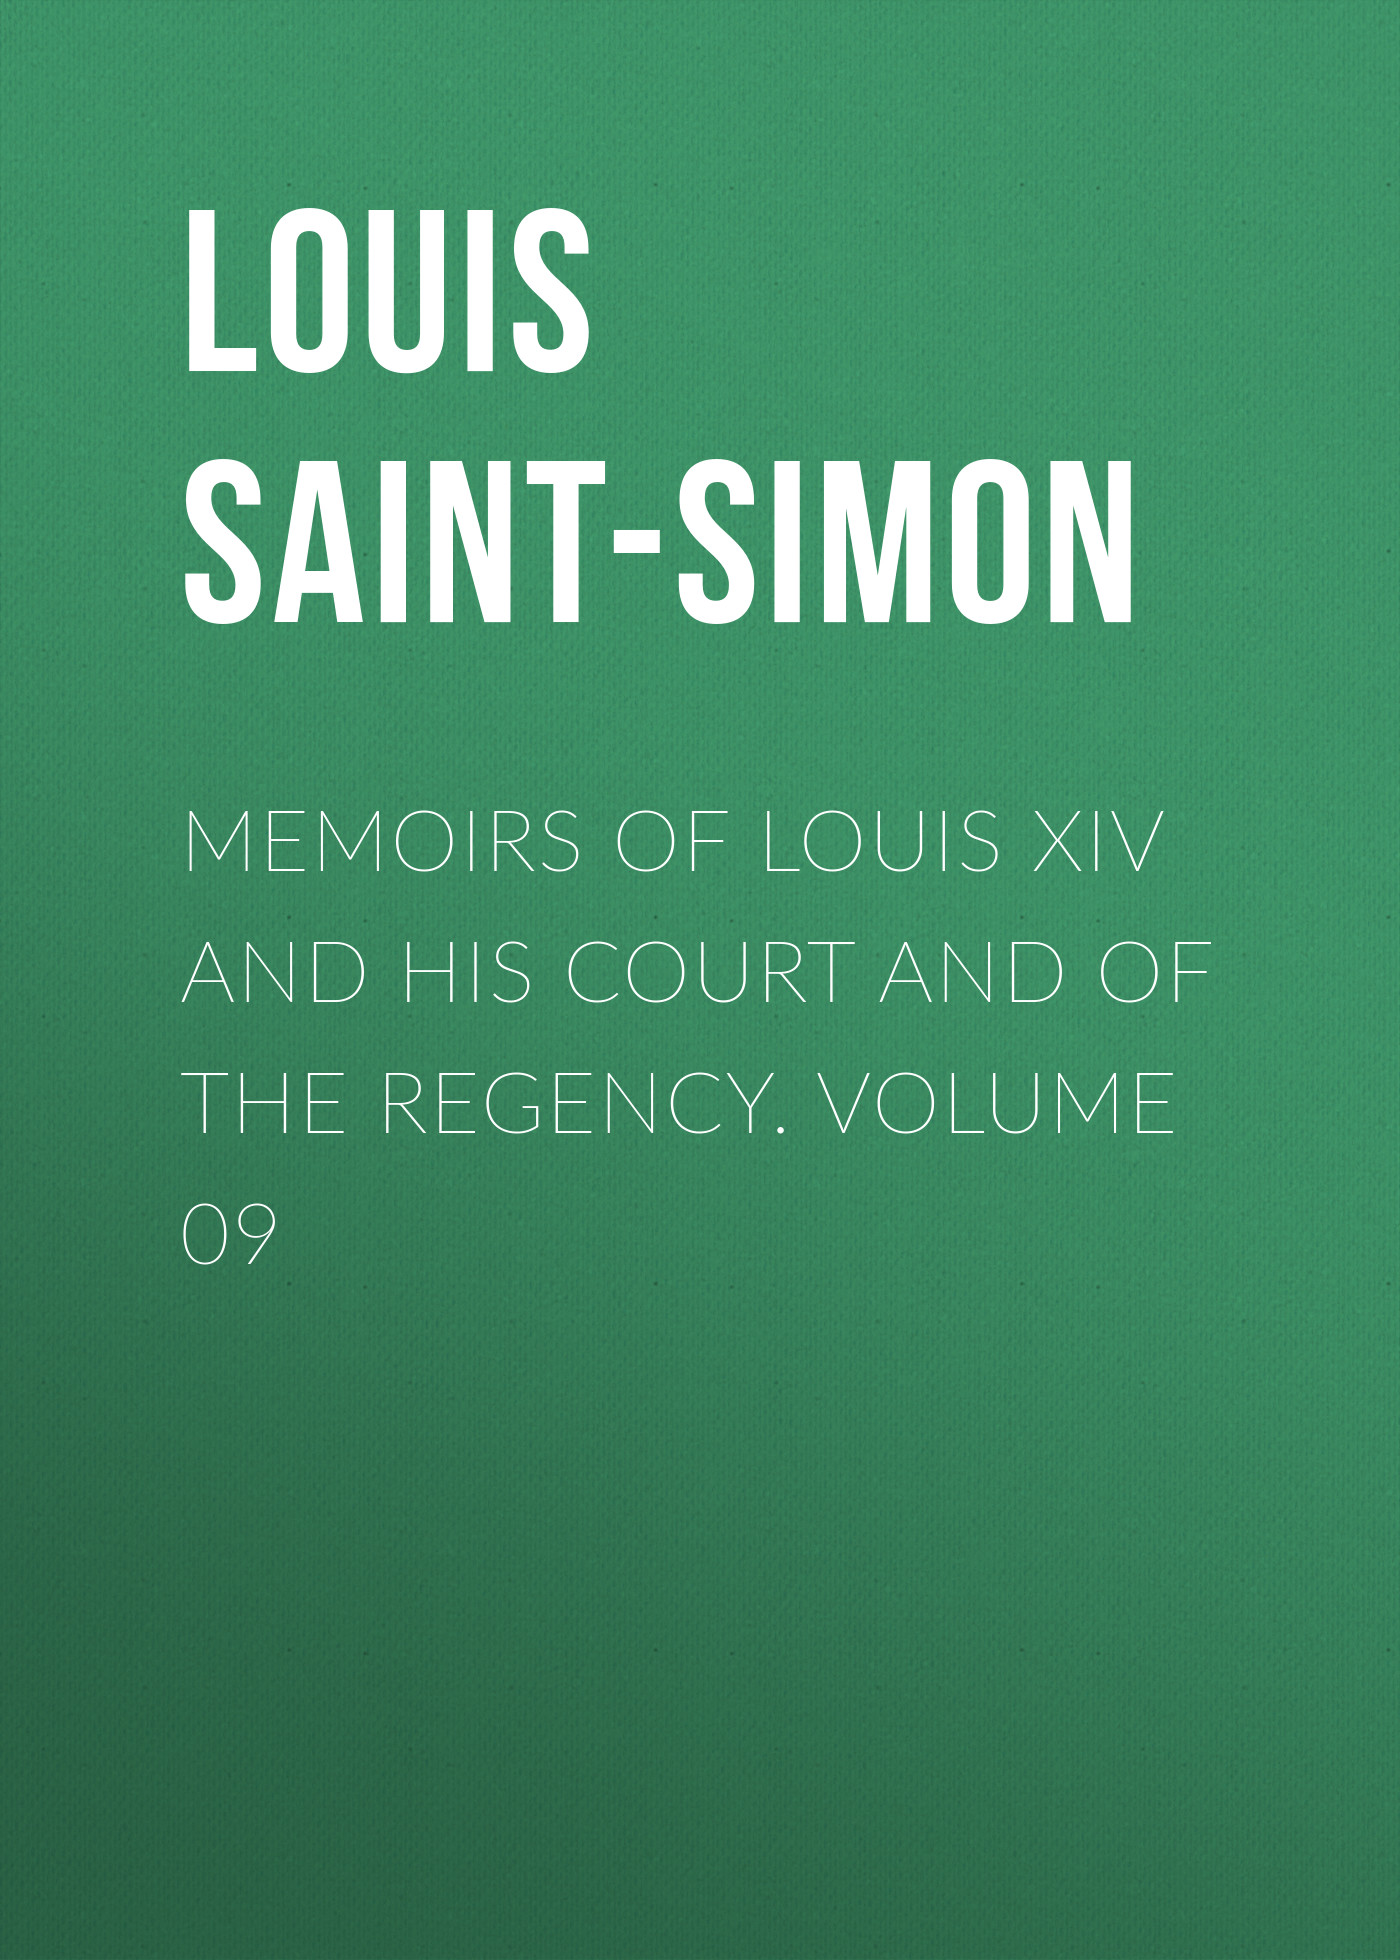 Memoirs of Louis XIV and His Court and of the Regency. Volume 09